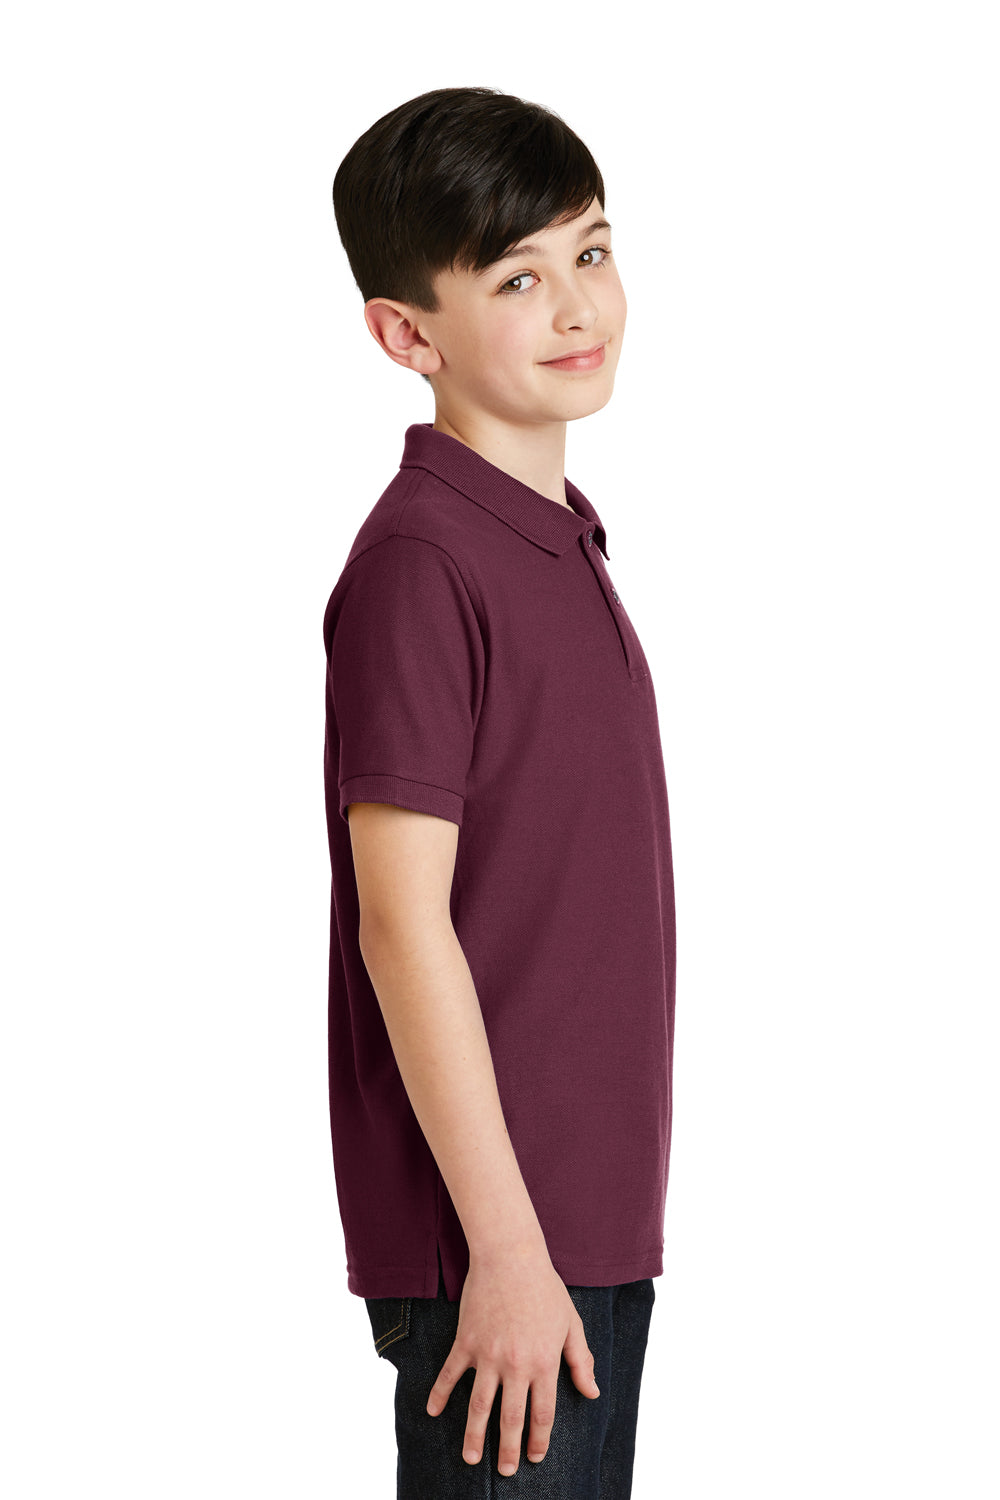 Port Authority Y500 Youth Silk Touch Wrinkle Resistant Short Sleeve Polo Shirt Burgundy Side